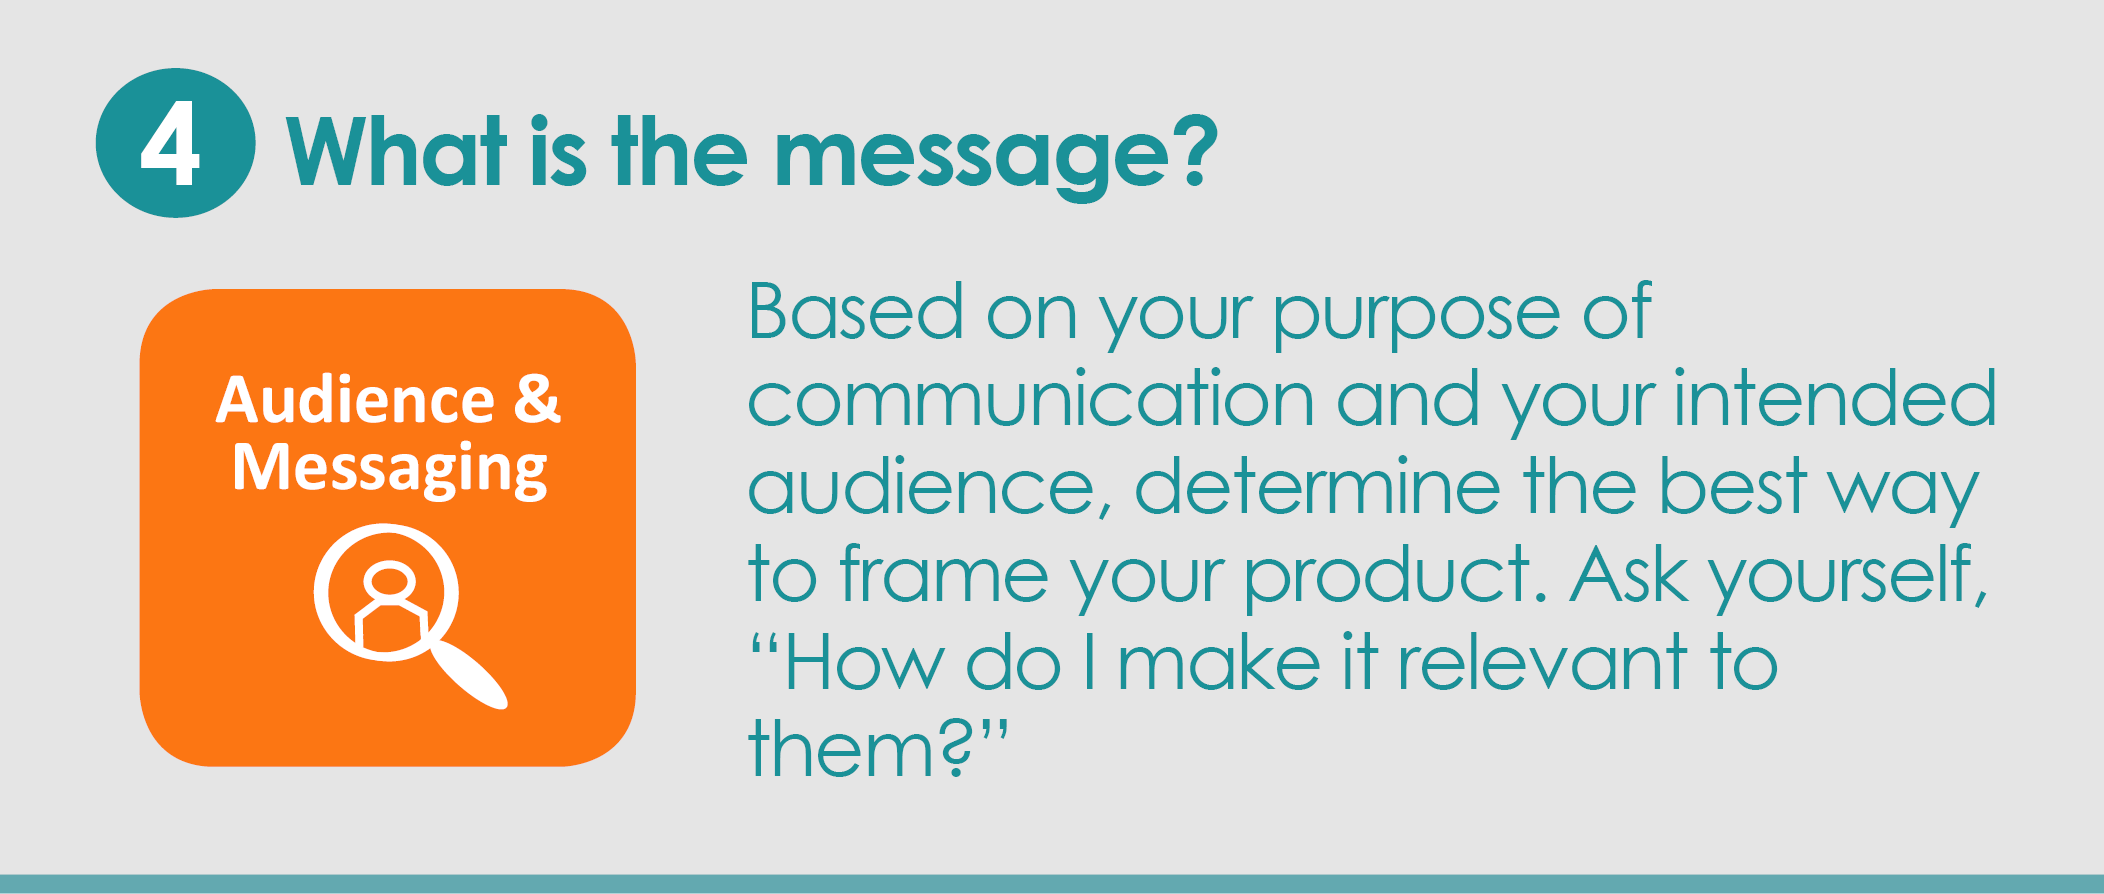 Step 4: What is the message? Based on your purpose of communication and your intended audience, determine the best way to frame your product. Ask yourself, “How do I make it relevant to them?”